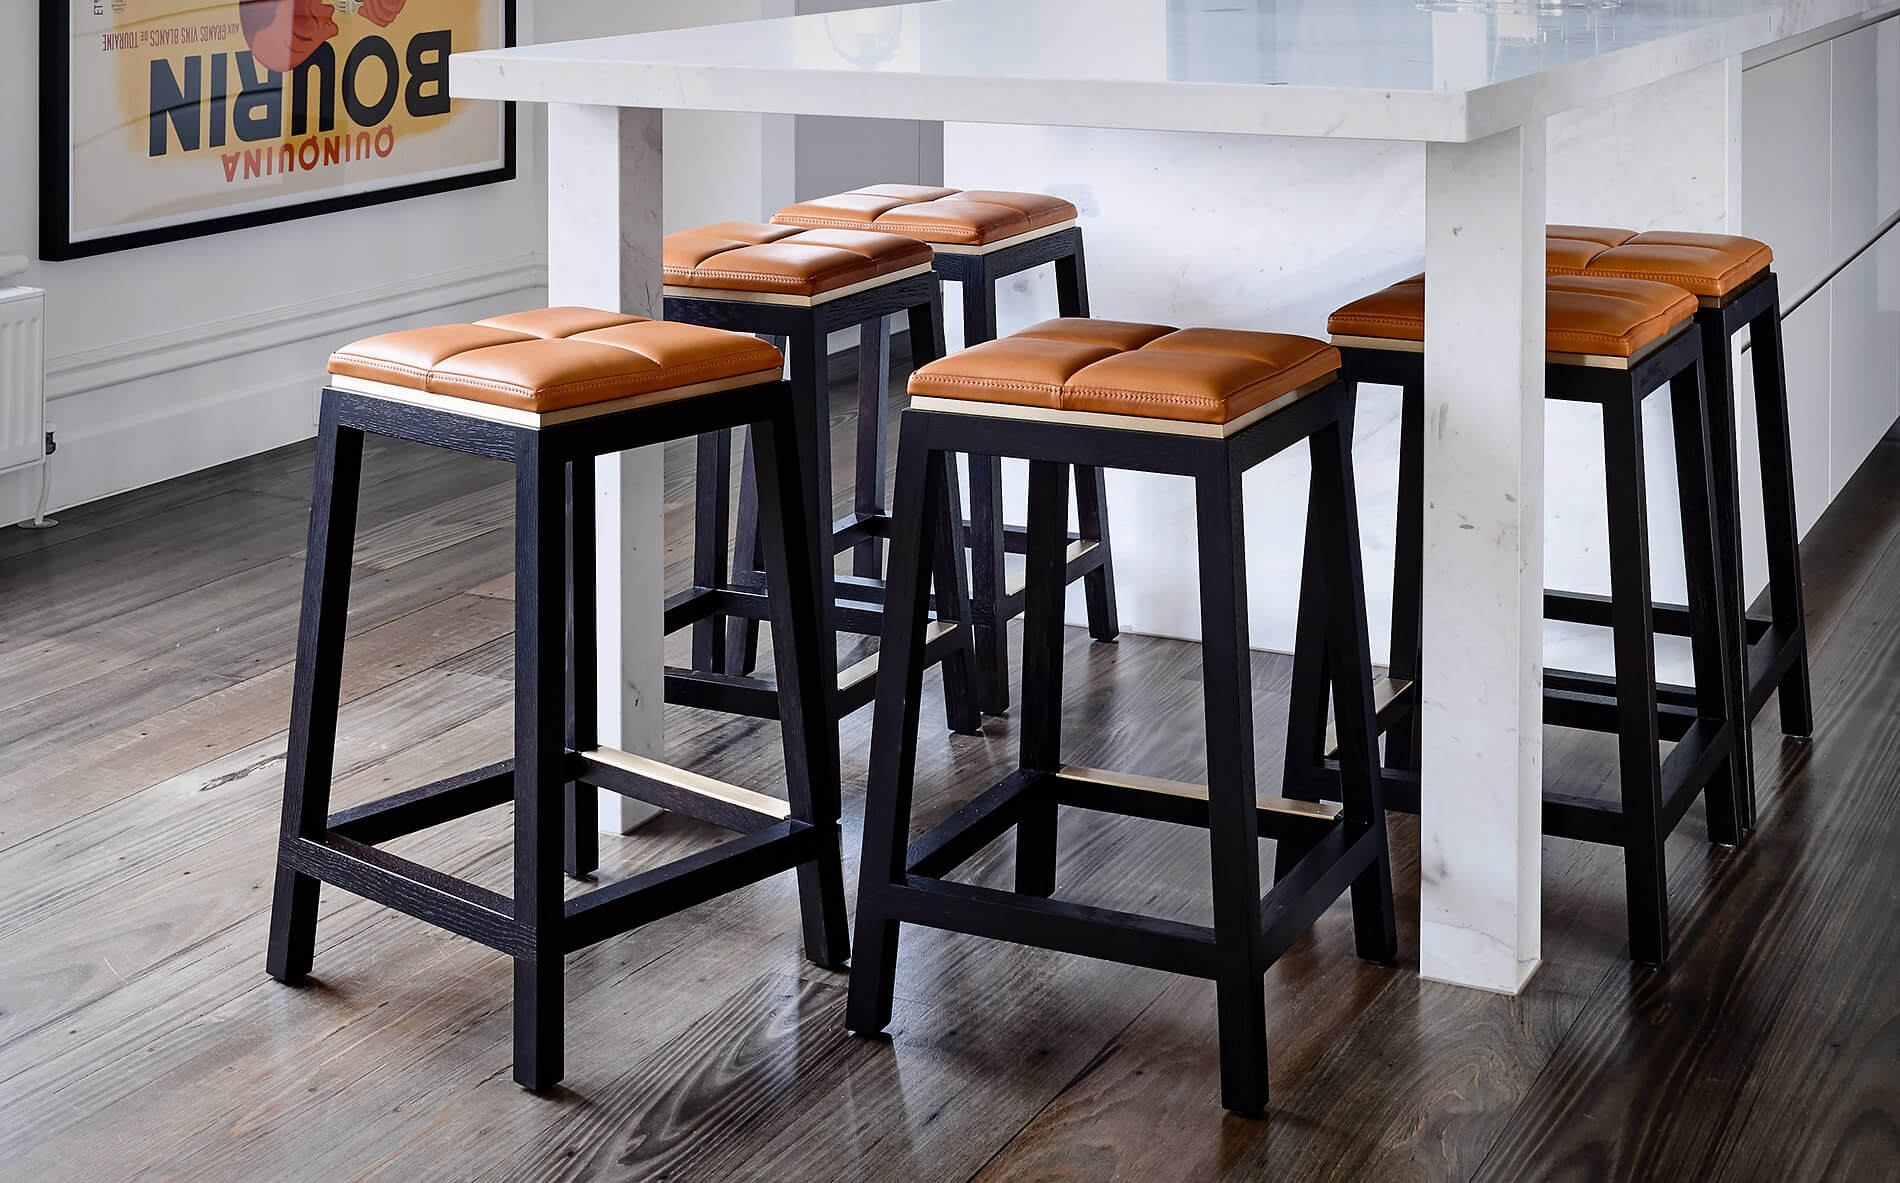 At first glance the subtle solid brass metal detail sparingly used on the designer stools for shadow line and footrest features catches your cleverly designed by Australian designer FrancoCrea